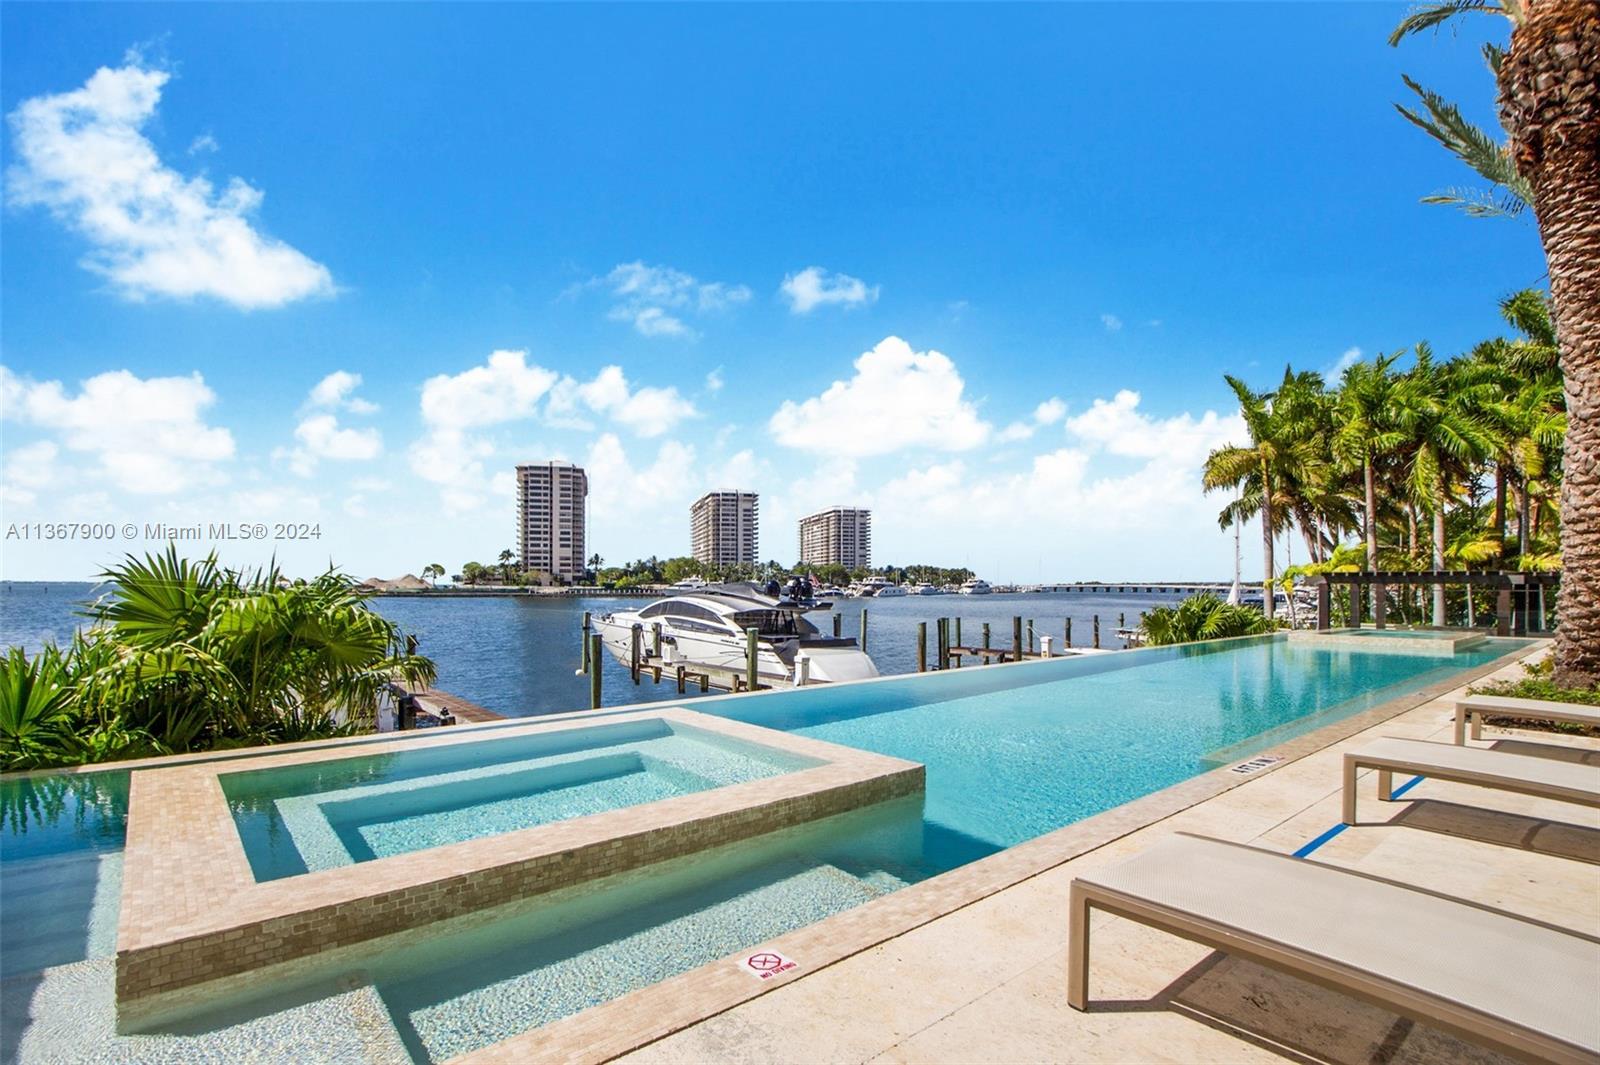 Welcome inside this Waterfront  2-sory apartment boasting 3 beds, 5 ½ bath + den, located in Coconut Grove inside the private Residences of Vizcaya. Spanning 4000 sf, this breezy unit offers an expansive 700 sf covered terrace with unobstructed views of Biscayne Bay, idyllic for entertaining with room for a jacuzzi, barbeque, al fresco dining and wraparound sofa. Featuring direct access to a spacious dining and living room with built-in bar, residents can enjoy a light-filled open floor plan decorated with a vibrant palette and high ceilings, leading into a gourmet chef’s kitchen with custom appliances. Large spa-inspired baths make for optimal luxury. Additional features: Dock for drop-off/Pickup, 4 parking spaces, 24-hour security and close proximity to award-winning schools.